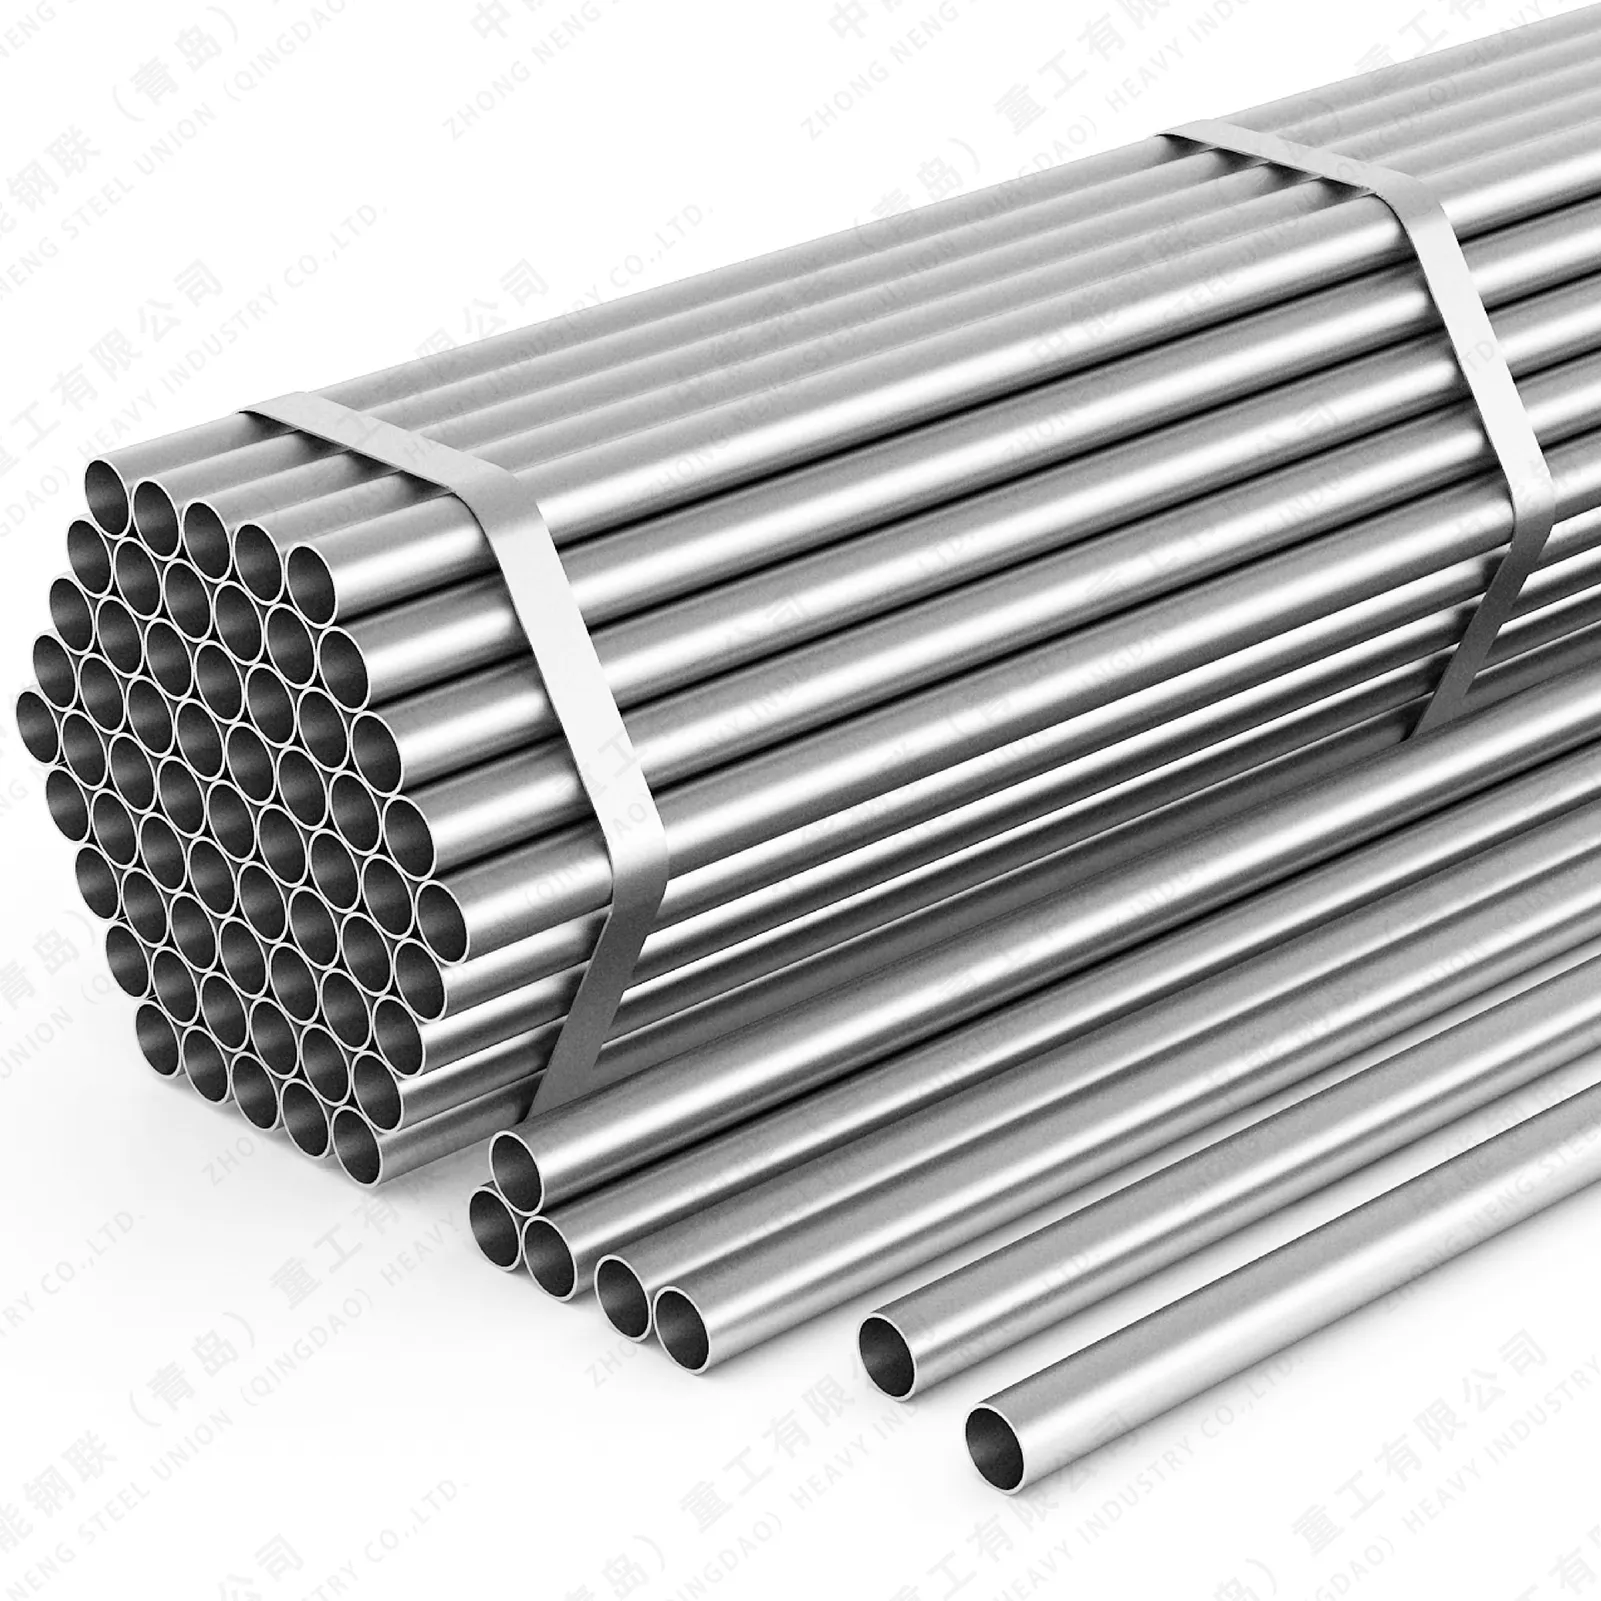 Pipe Tube Astm A312 1/8inch Pipe Manufacturer Coil Rolled 201 Stainless Steel Welded Seamless by Theoretical Weight Round CN;SHN